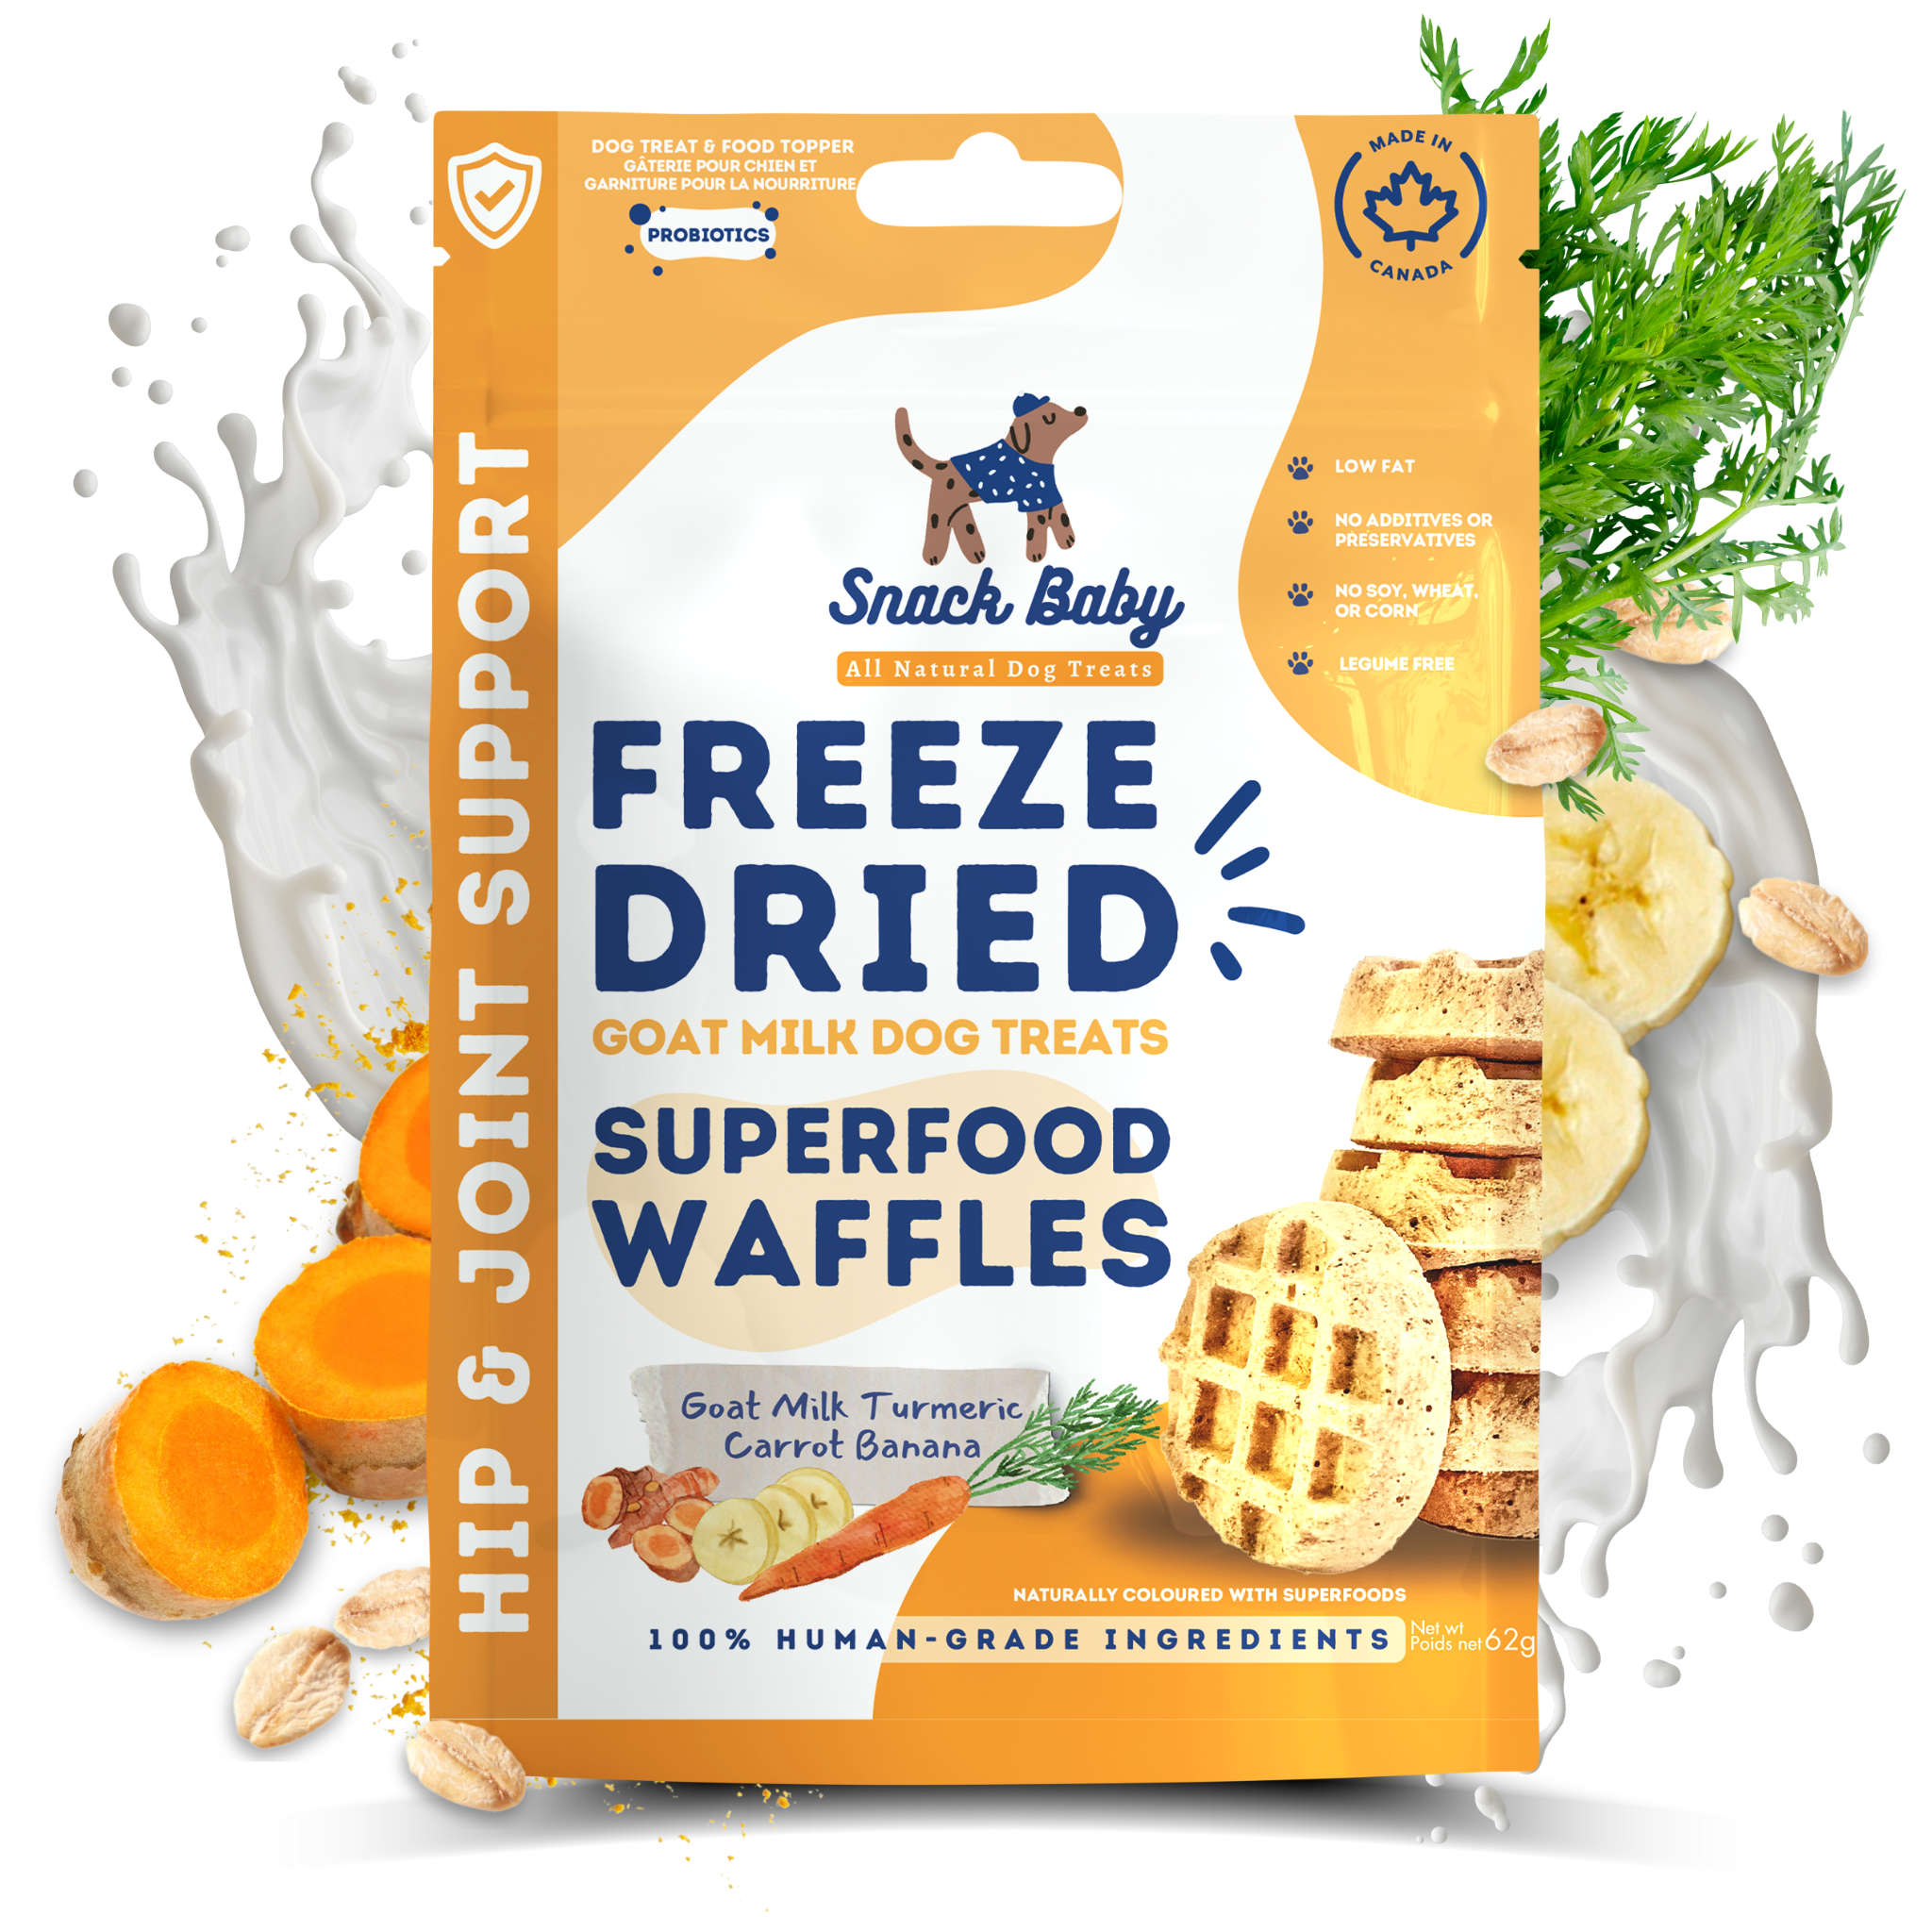 Snack Baby's Superfood Waffles with Turmeric and Carrot all natural dog treats